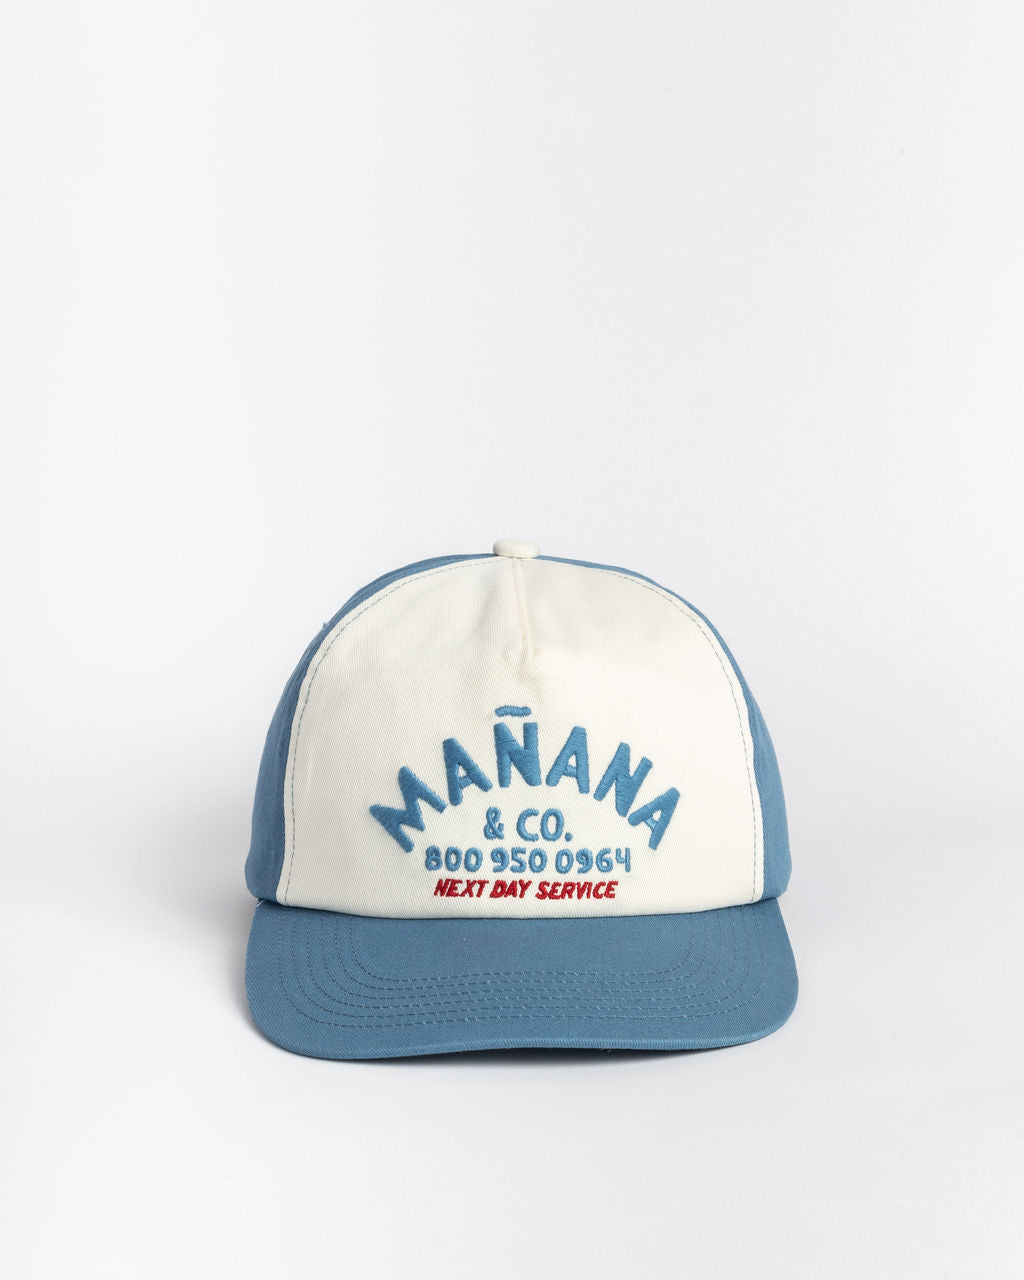 Blue Shop Hat with Manana branding